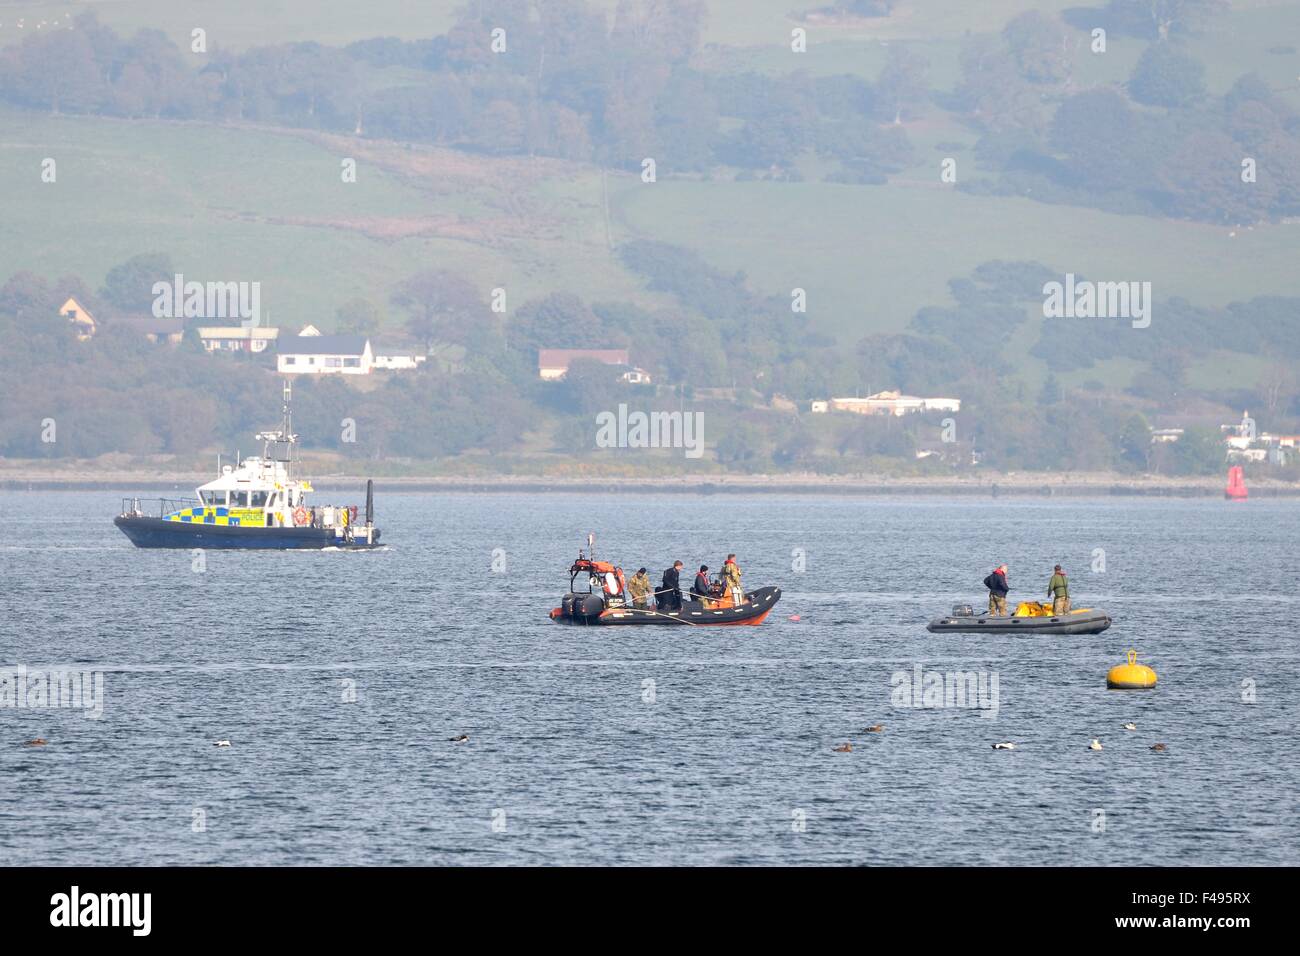 River Clyde, Gourock, Scotland, UK. 15th October 2015. Royal Navy bomb disposal unit detonates wartime mine. The Royal Navy bomb disposal unit towed the world war 2 mine, which was found close to the Gourock shoreline, to safety before divers set an explosive charge to destroy and render the mine safe. Credit:  Douglas Carr/Alamy Live News Stock Photo